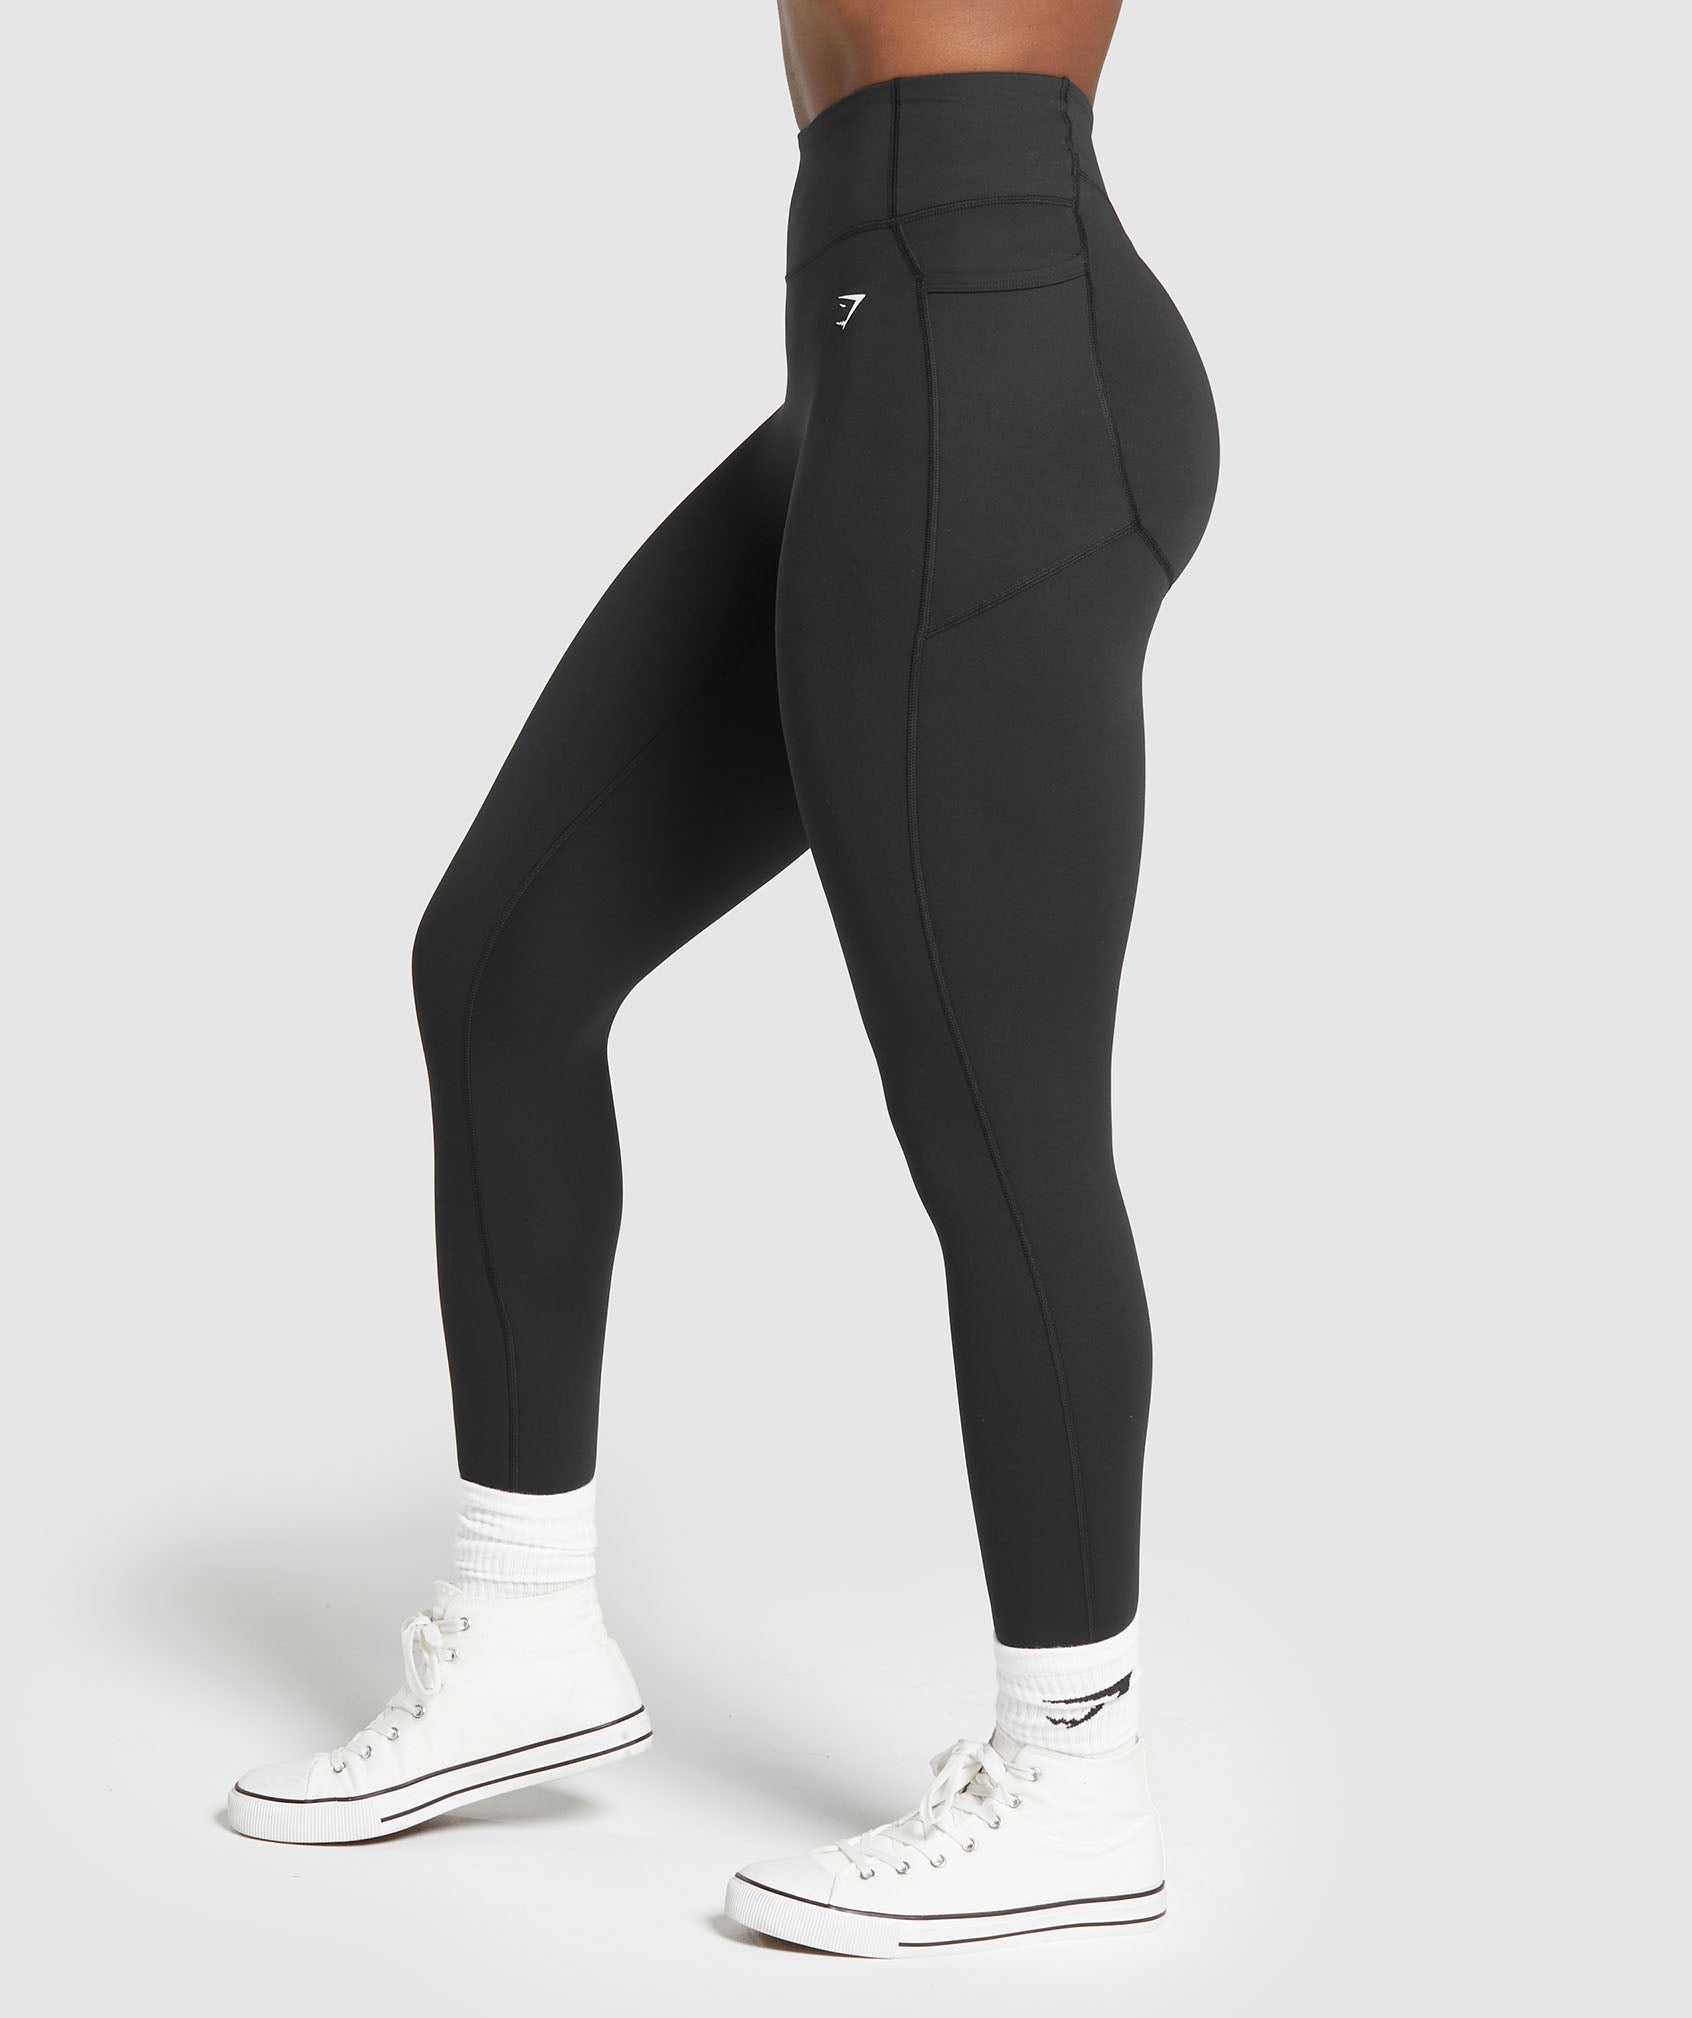 Gym Leggings With Pockets For Women